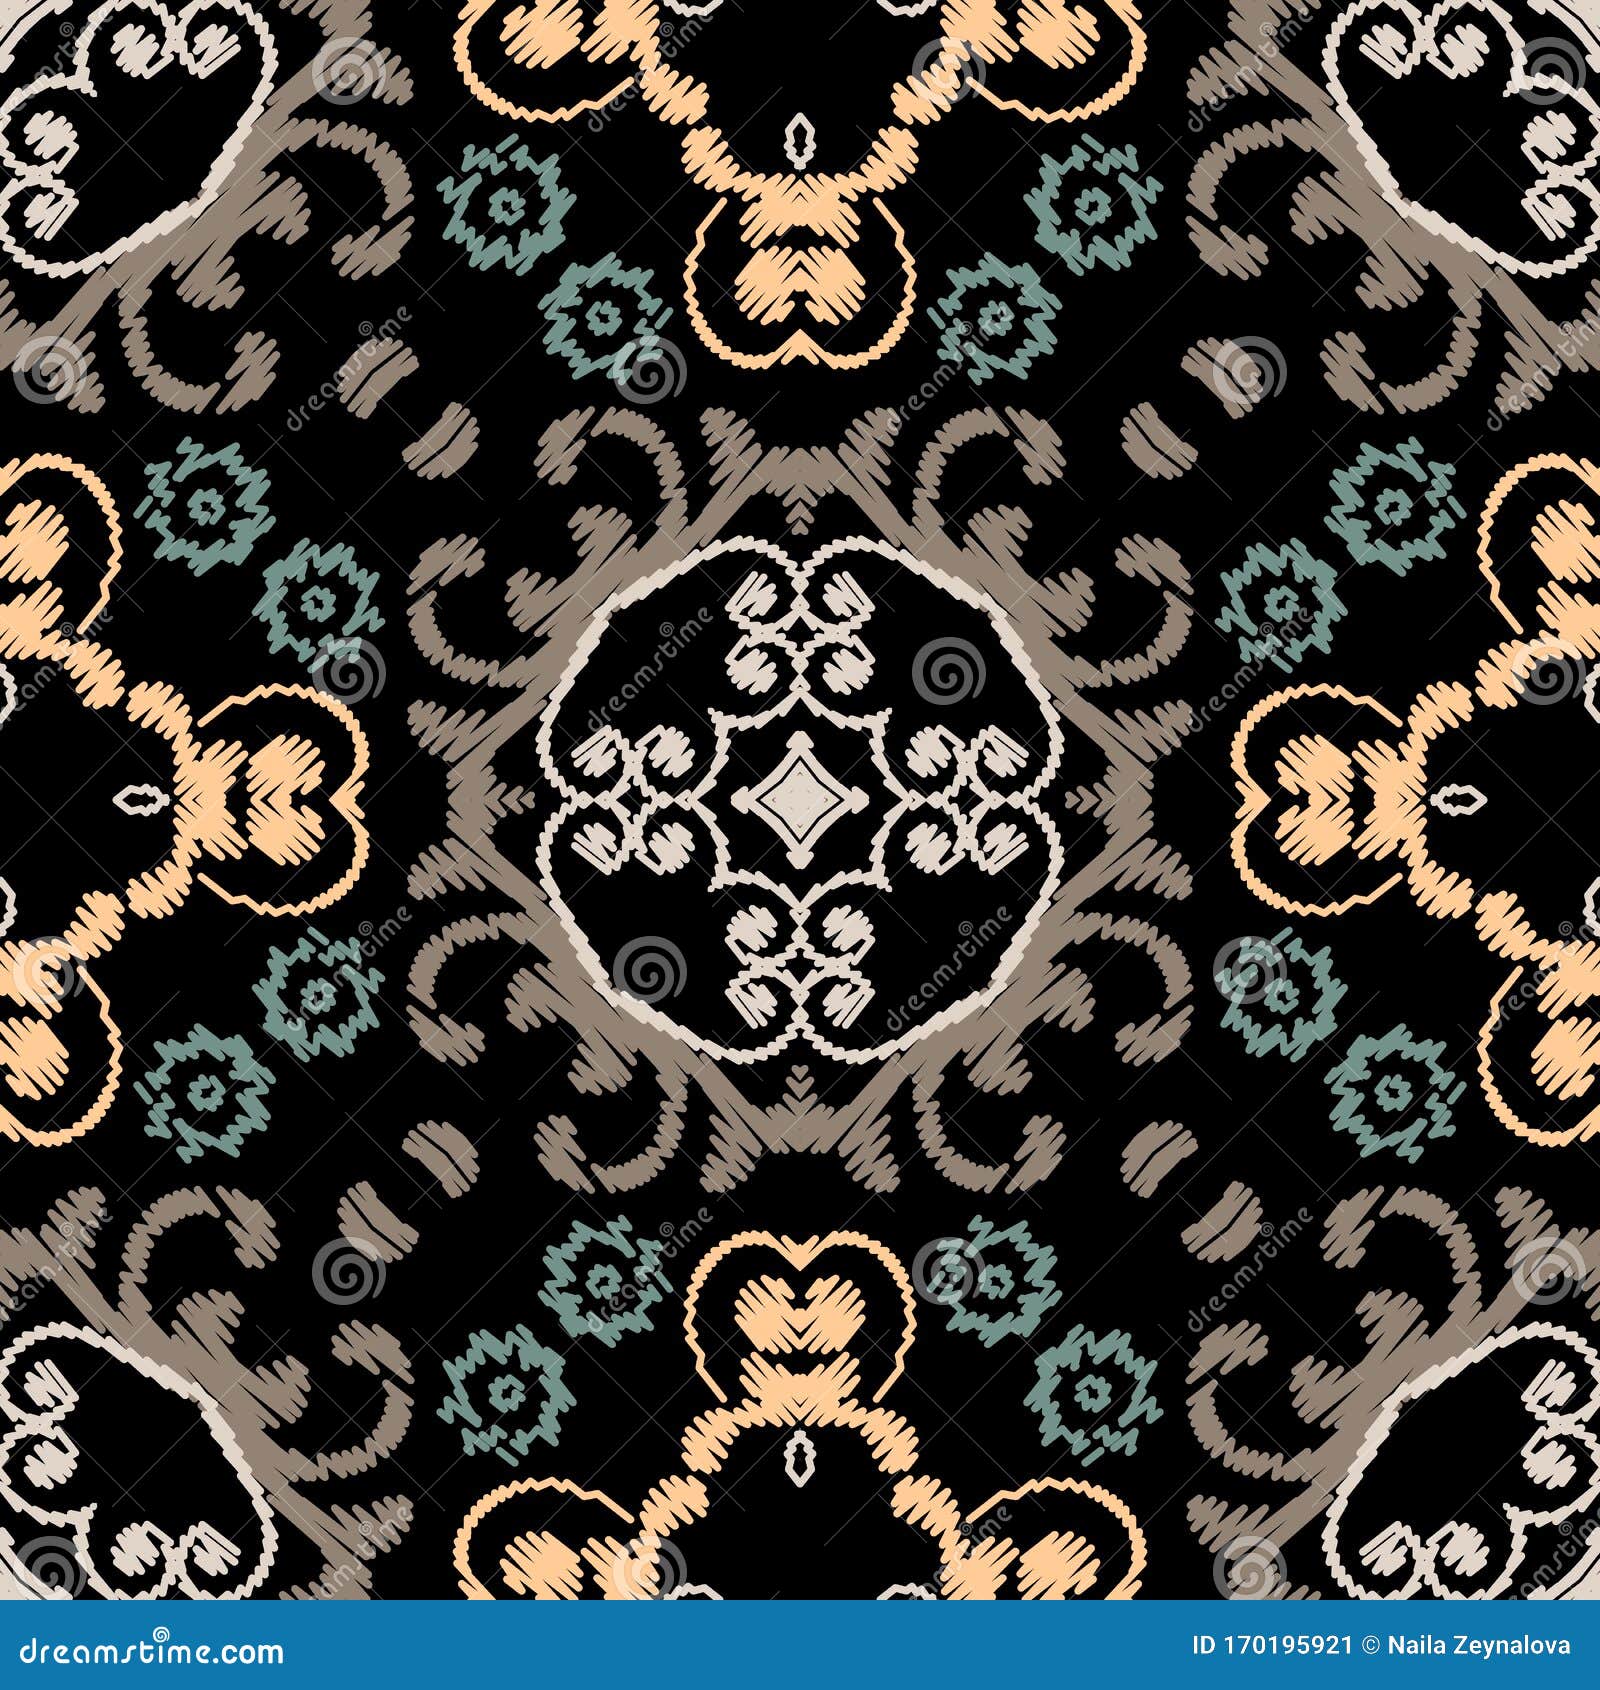 Baroque Textured Vector Seamless Pattern. Colorful Floral Embroidery ...